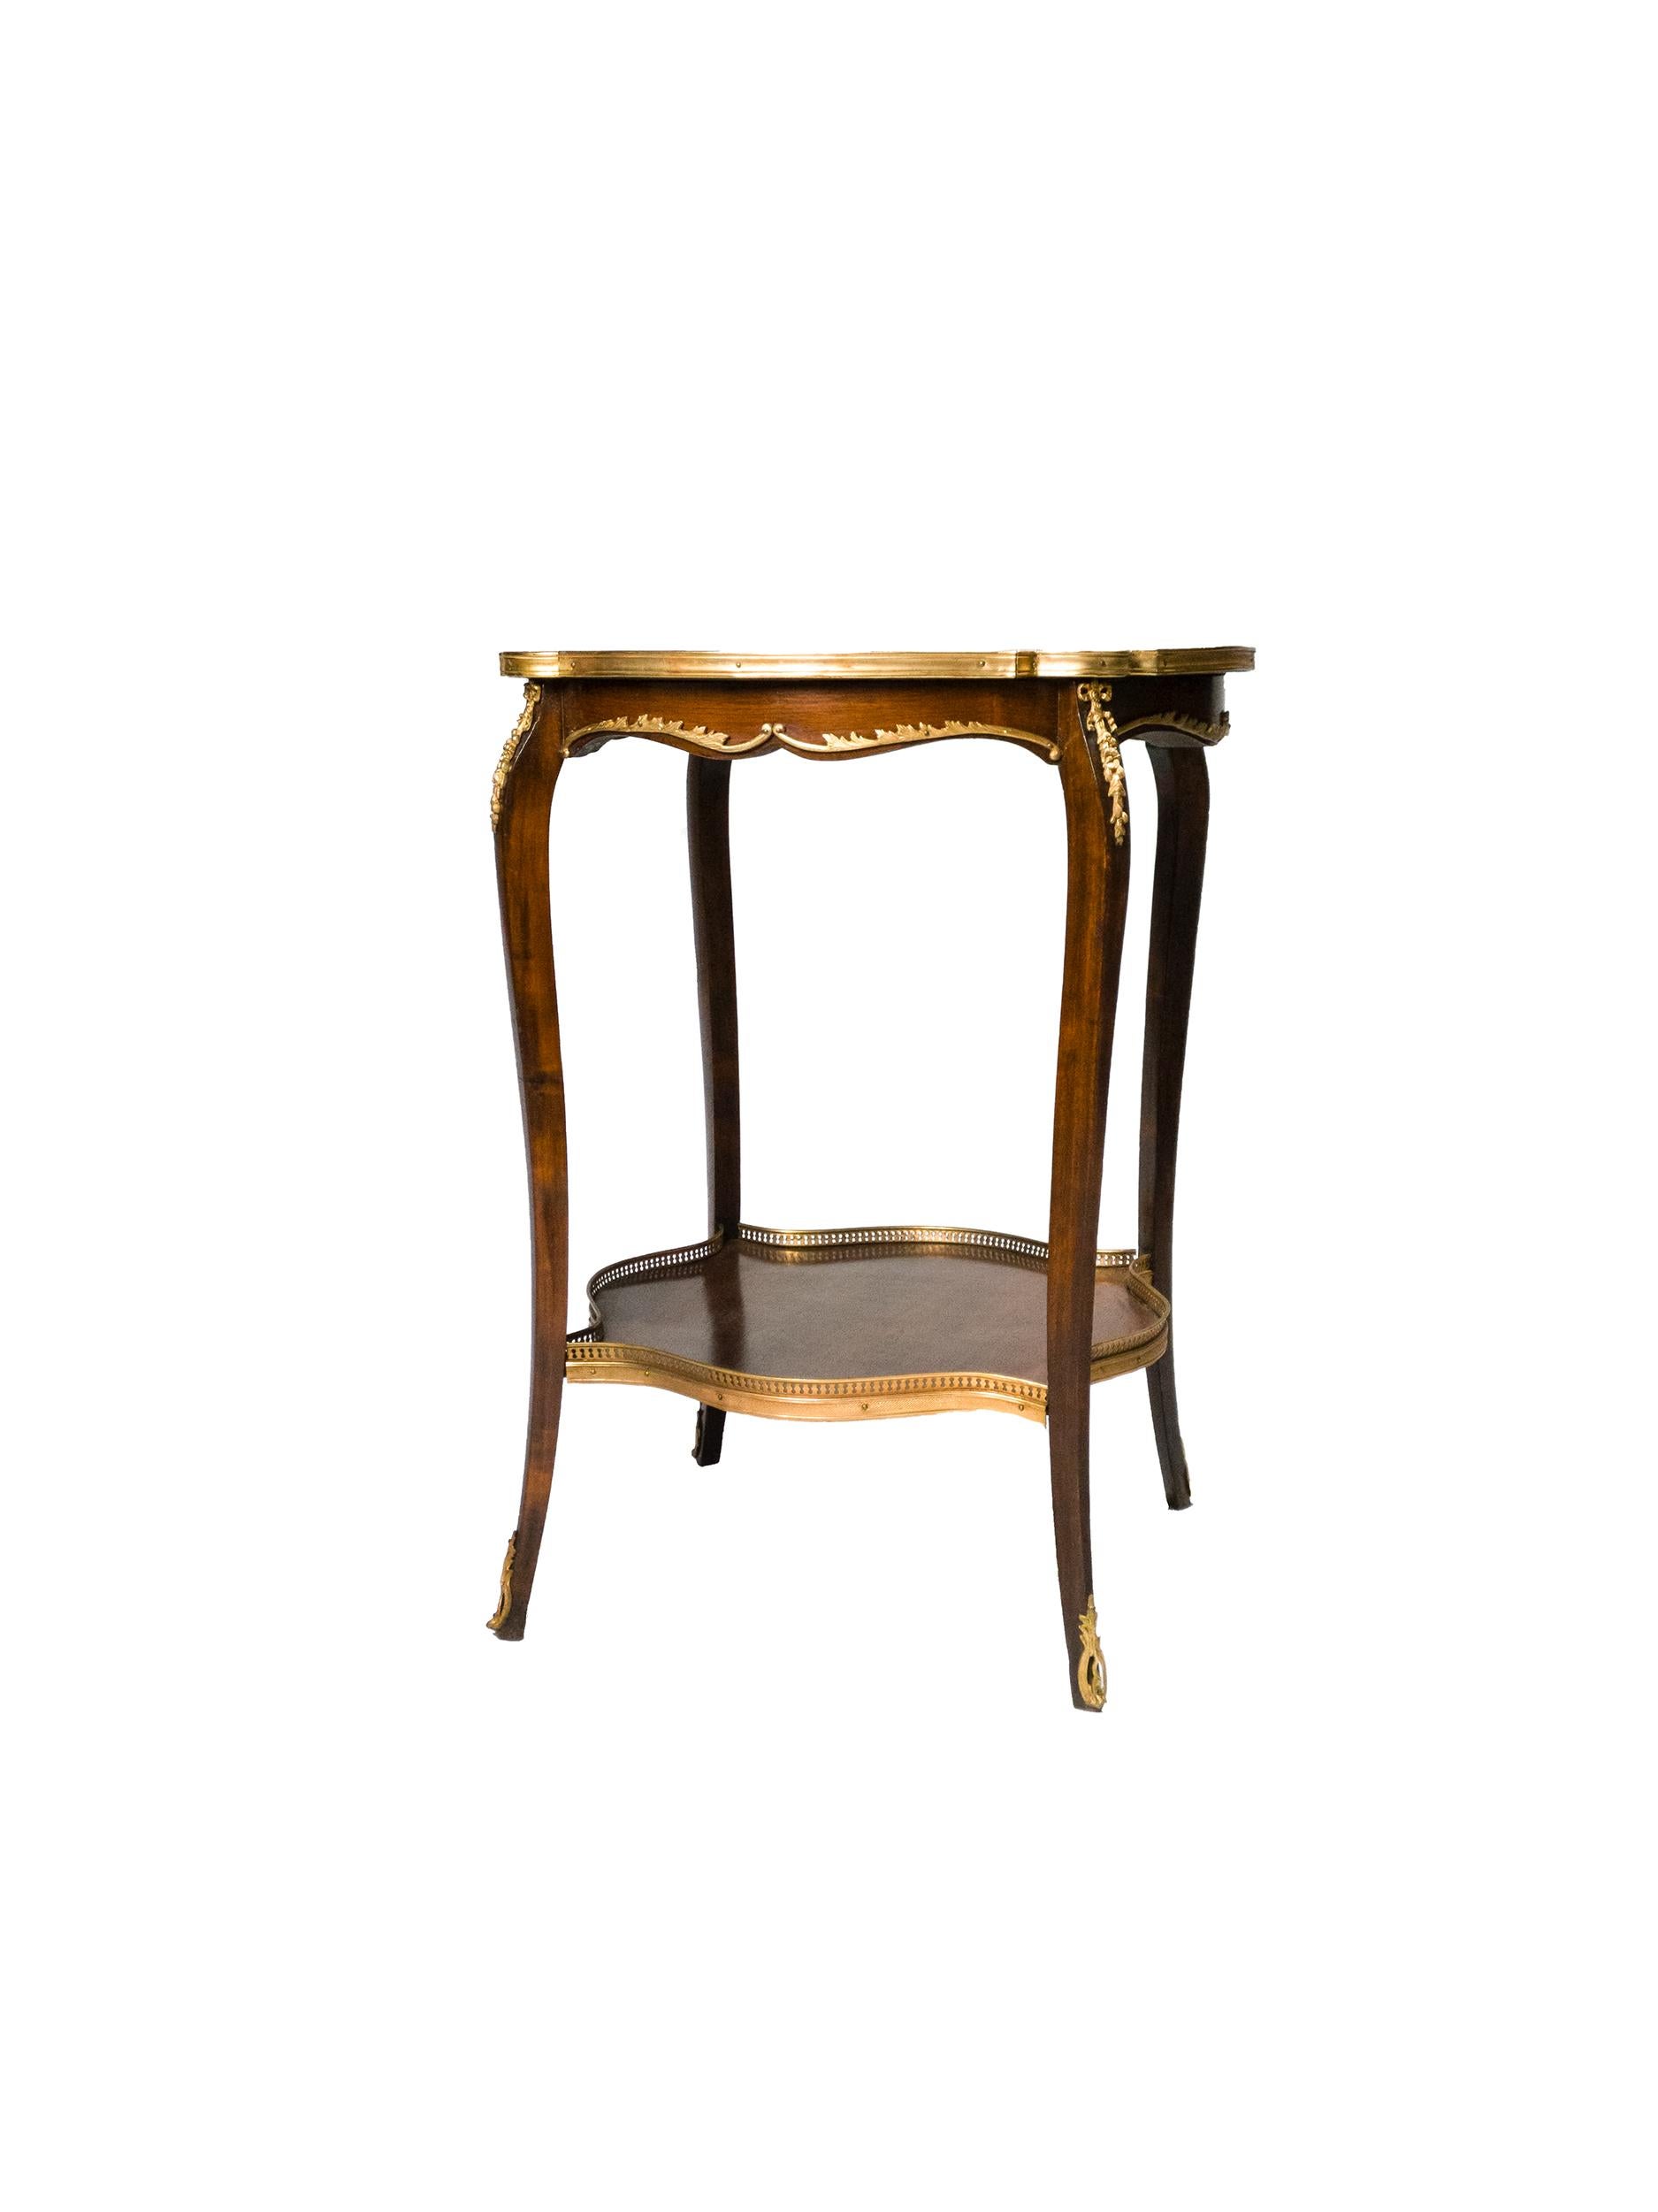 A 19th century Louis XV style kingwood gueridon side table raised on four cabriole legs with applied bronze mounts and rosewood marquetry at the top.

